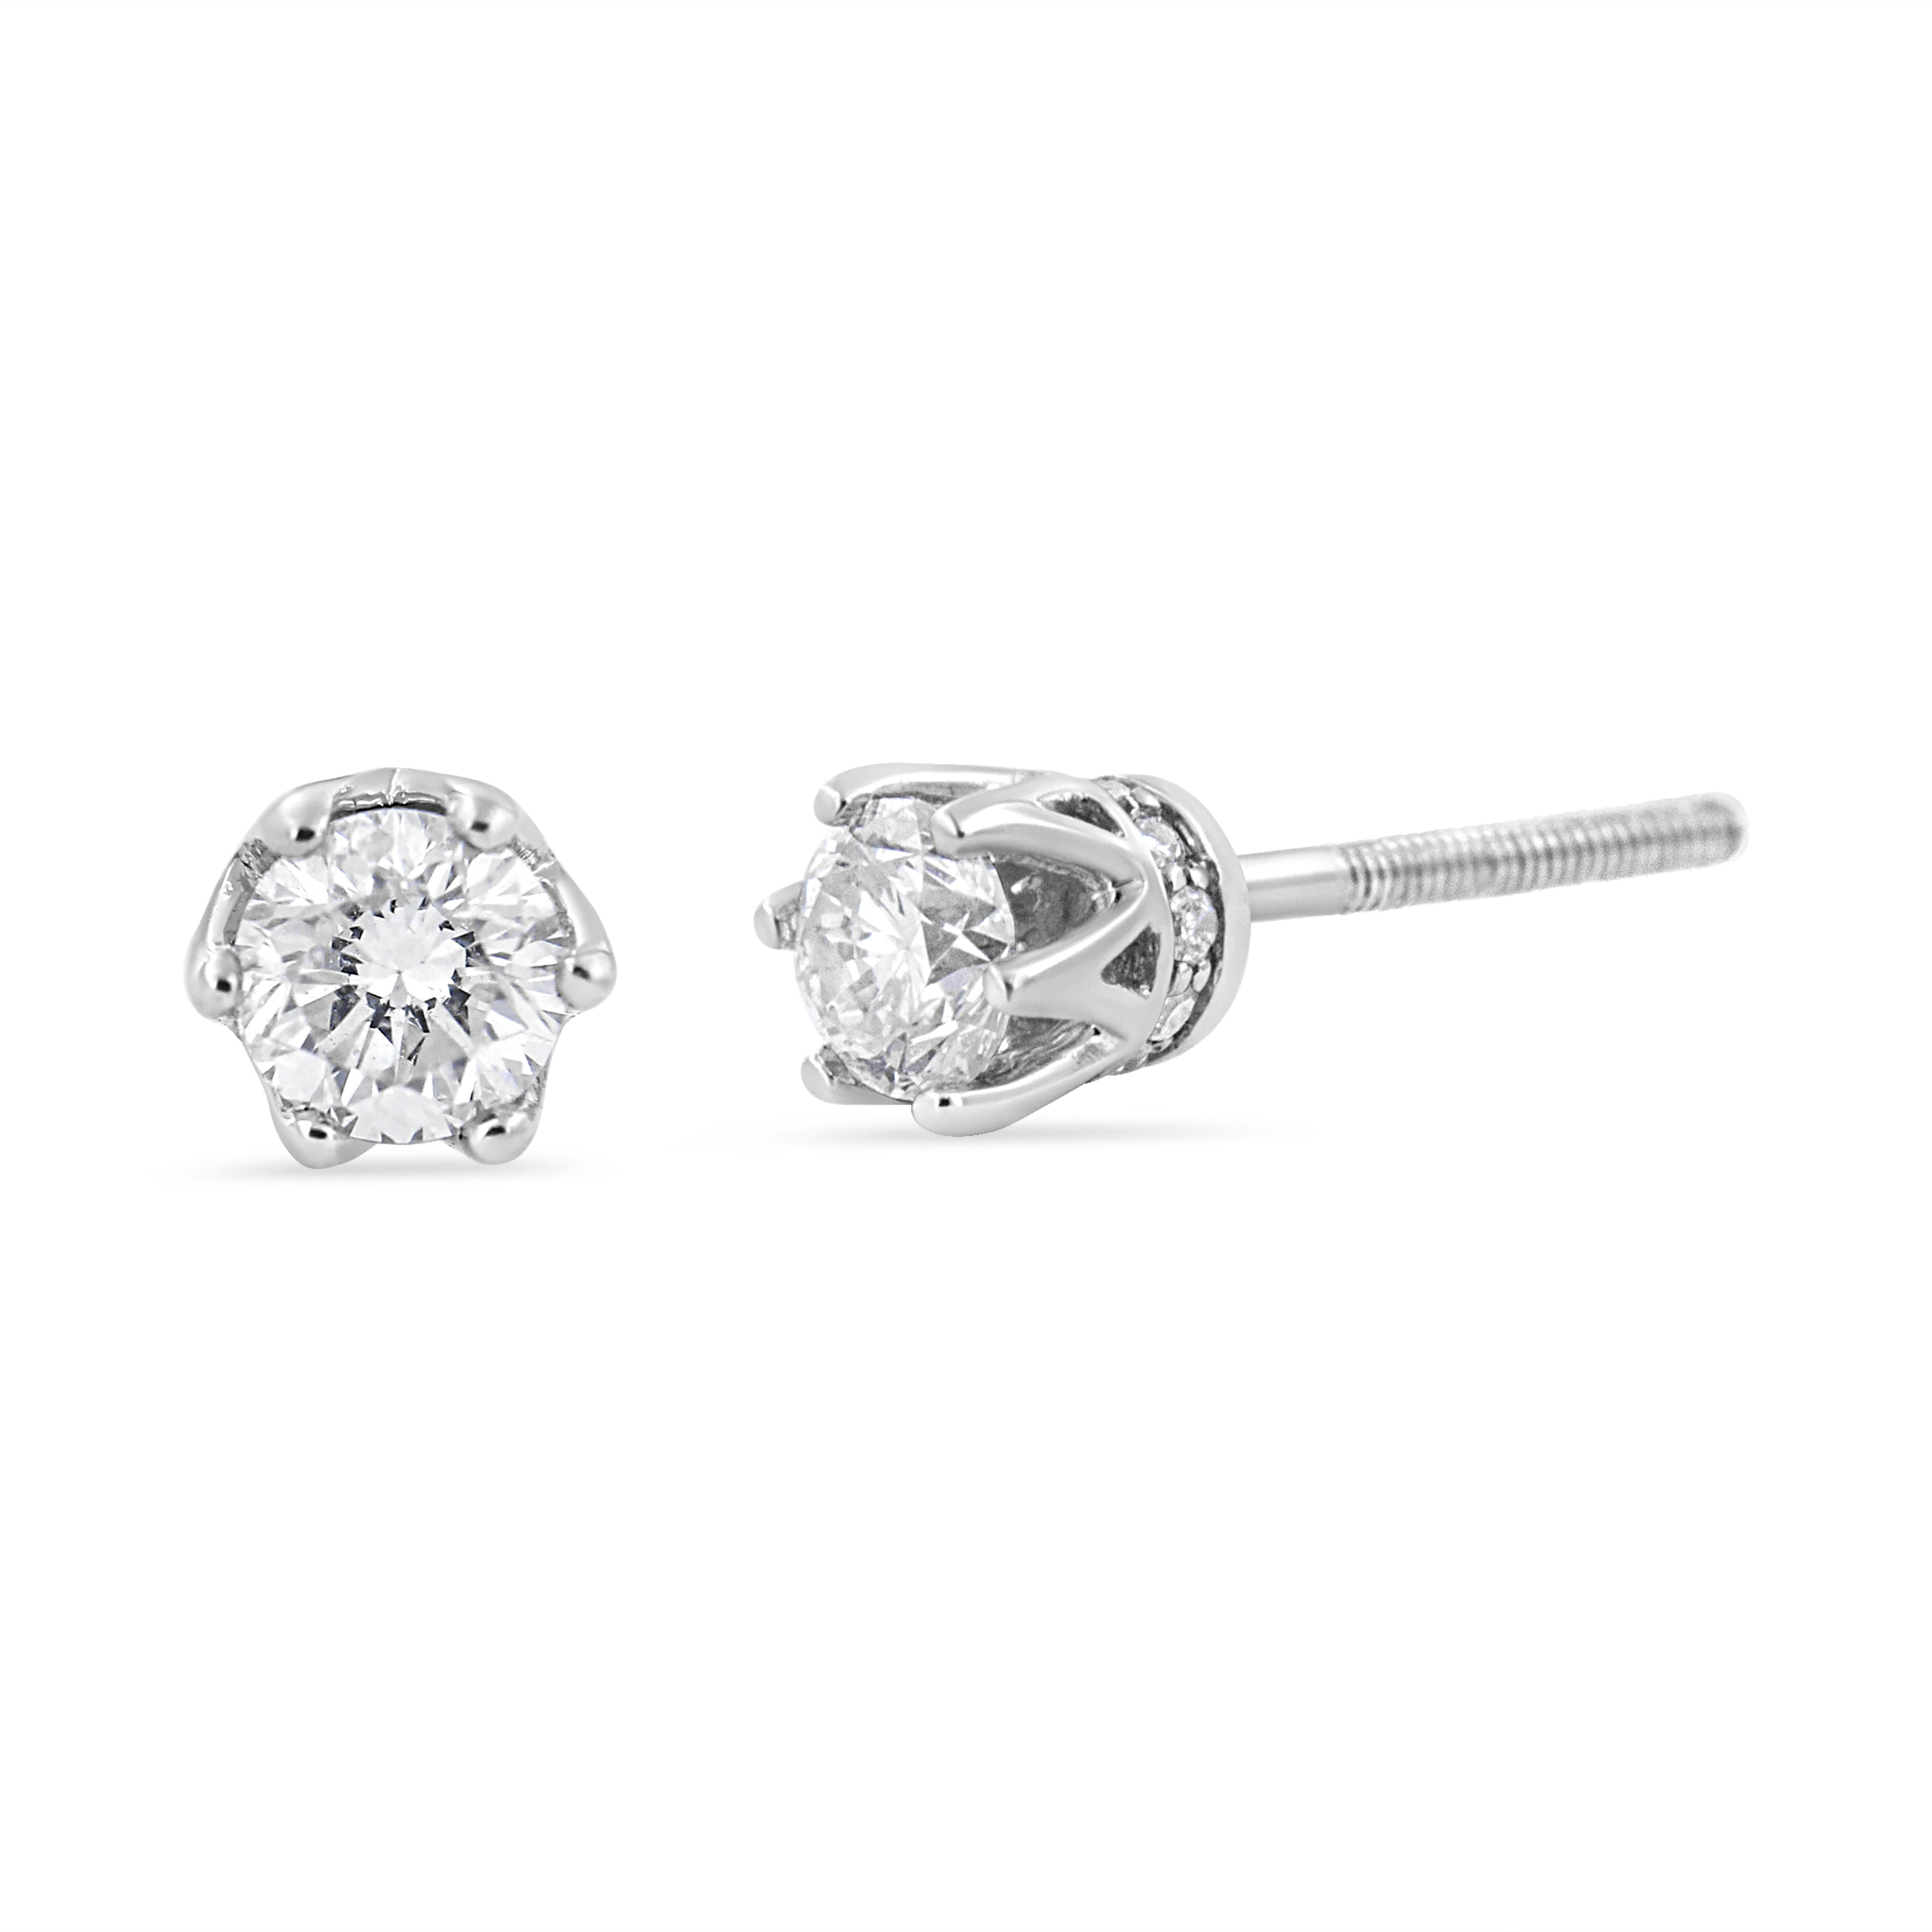 With regal hidden details, these diamond stud earrings are anything but ordinary. From the front, these 14kt white gold studs look like solitaires with a multi-prong setting. But the sideview brings into focus the crown design. Round diamond accents